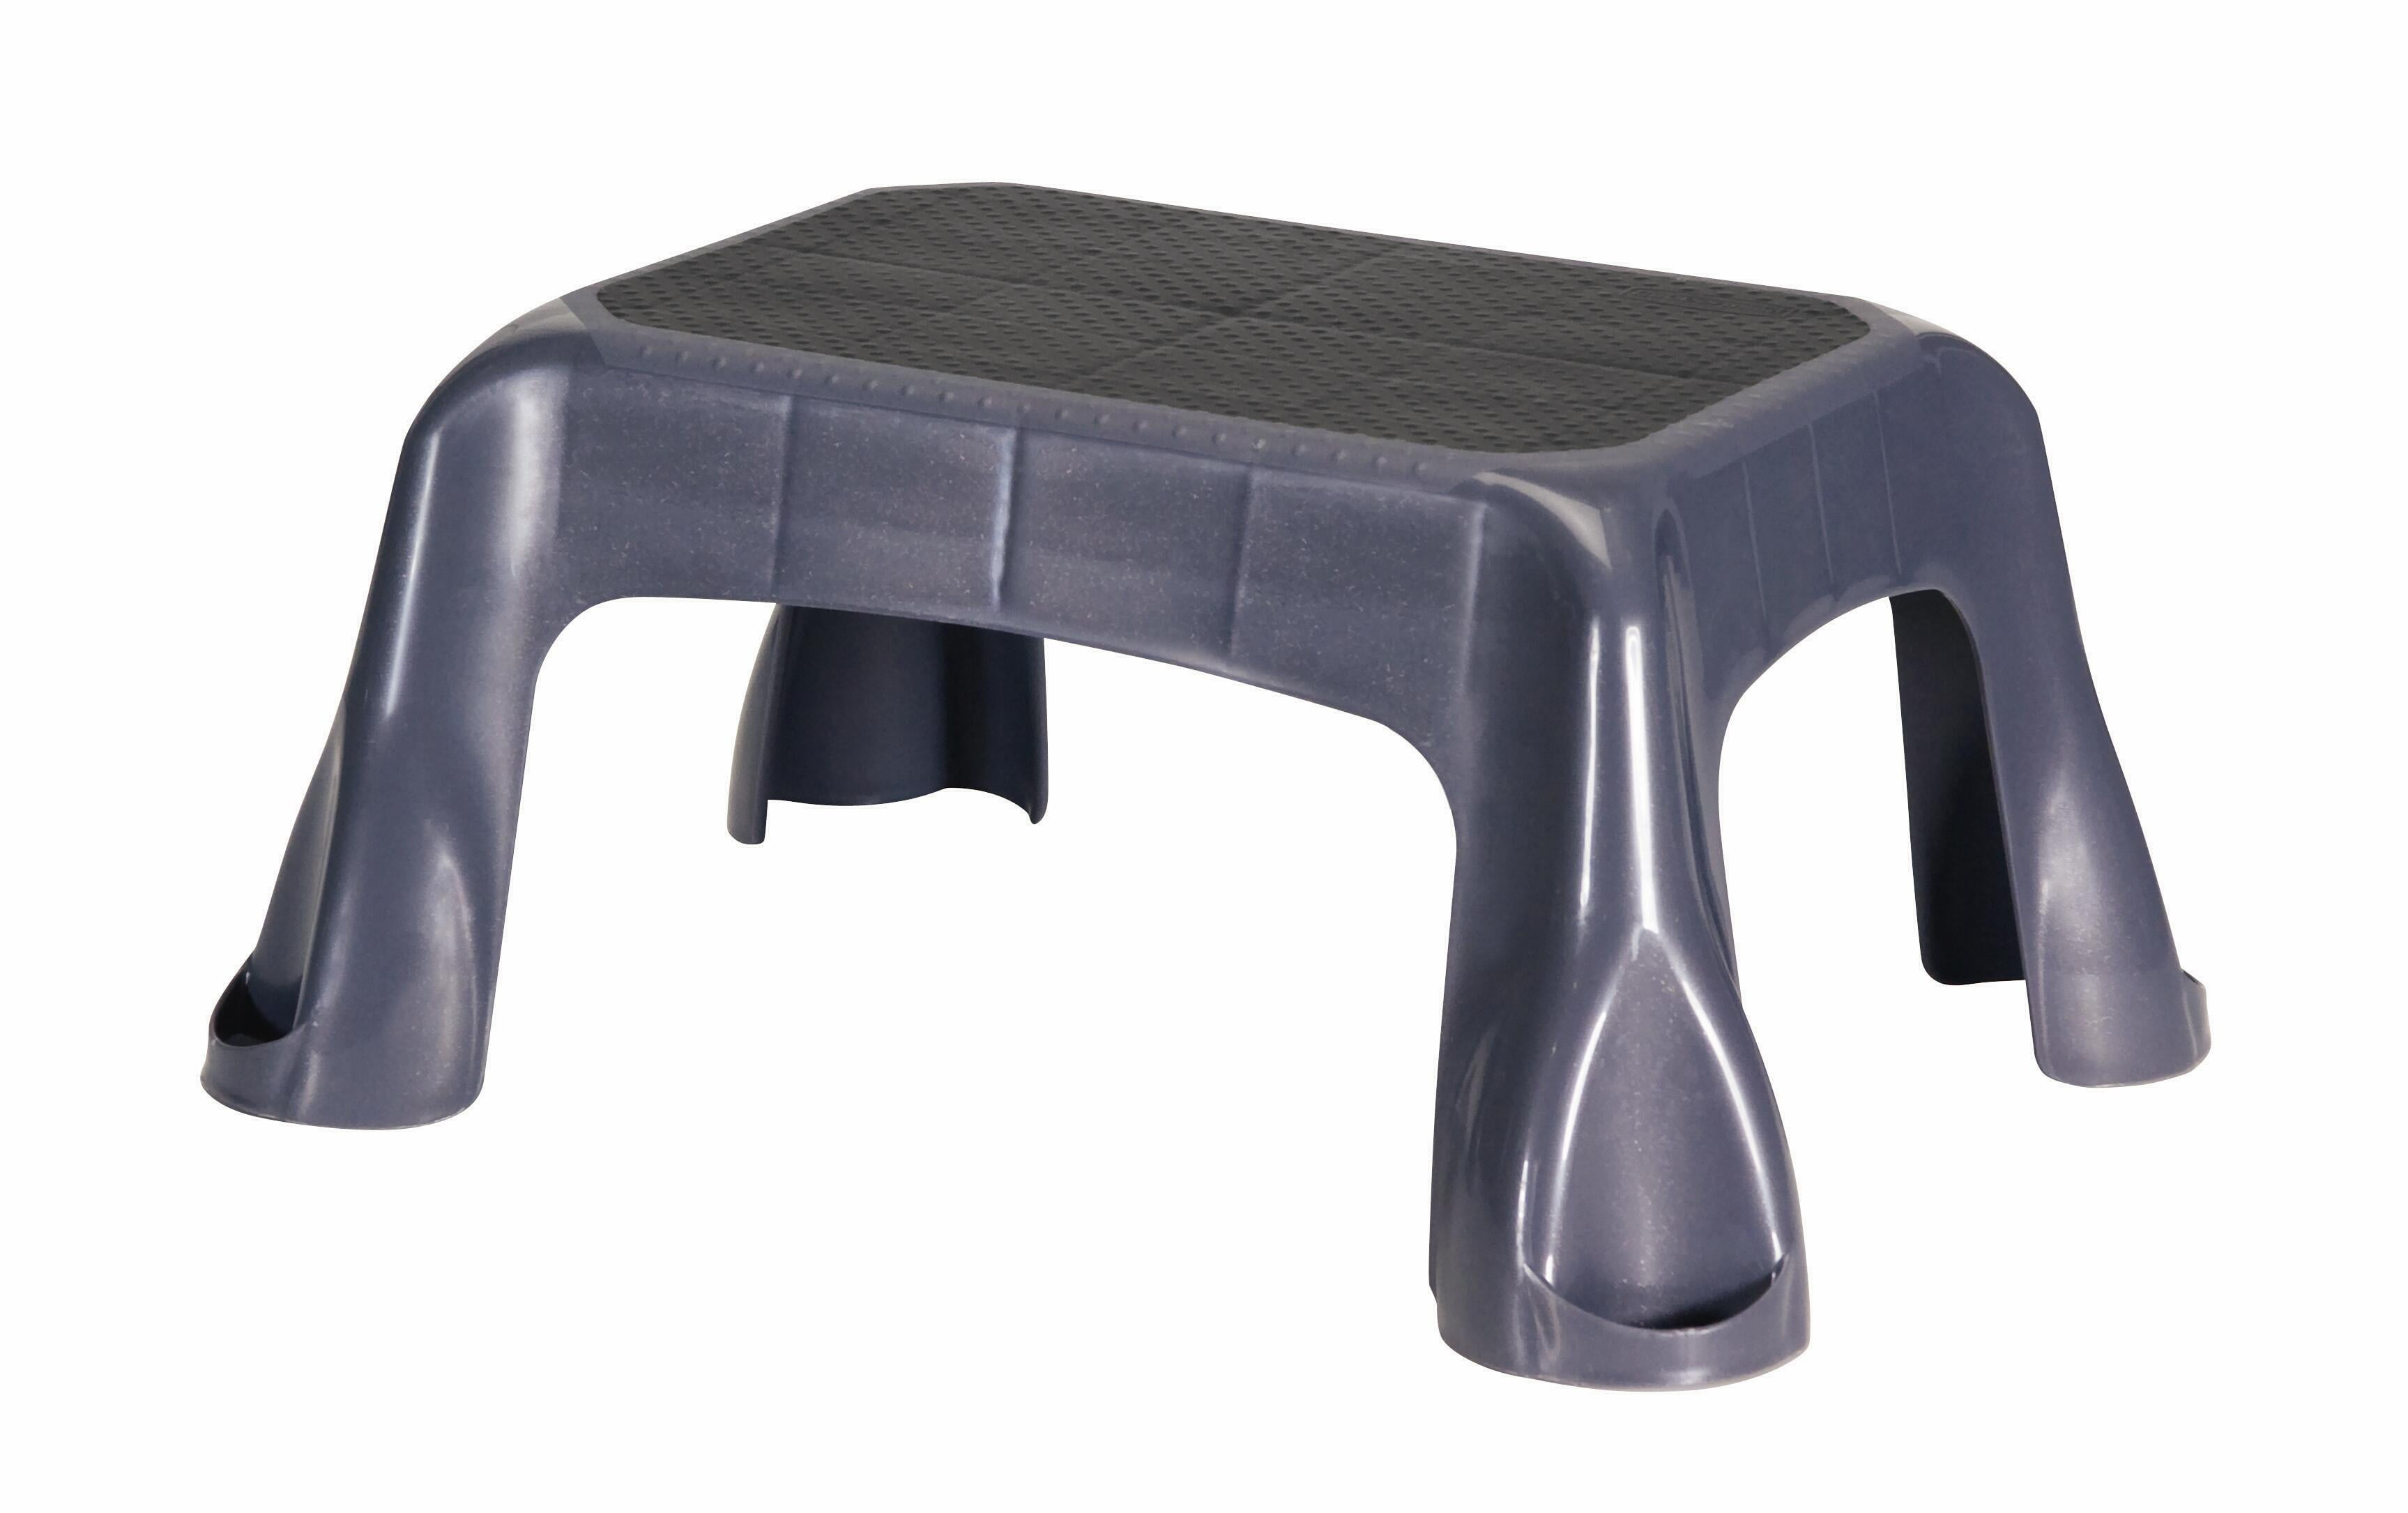 Stepping Stool Unique Anti-skid Surface Safe for all ages Bath Home Furniture